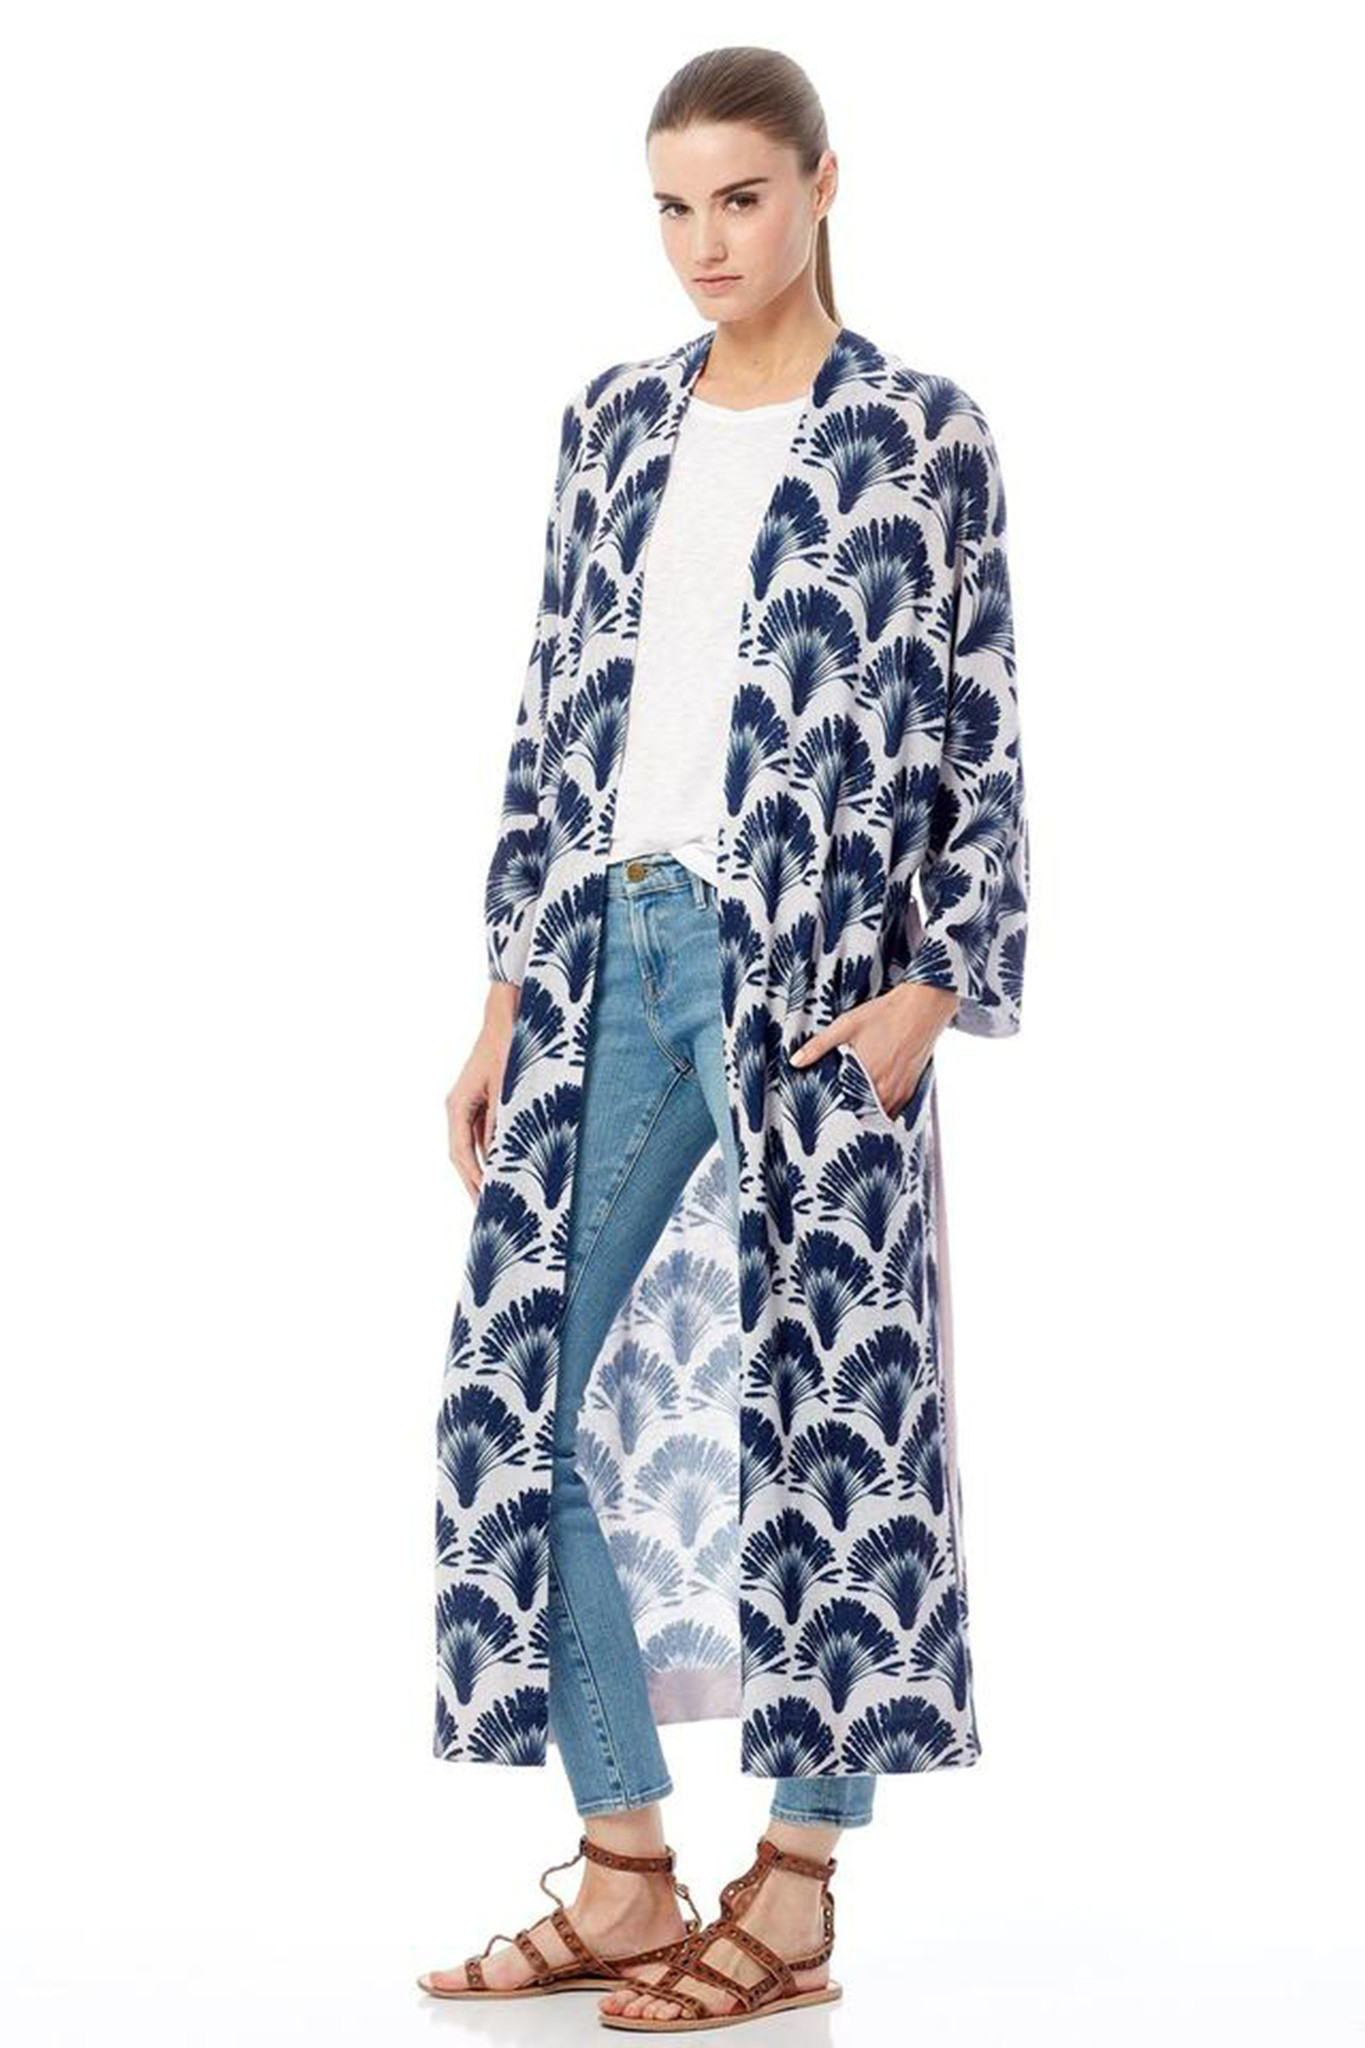 The Berlin, a lightweight cashmere robe with a palm frond print from 360Cashmere, is designed be worn over practically everything.